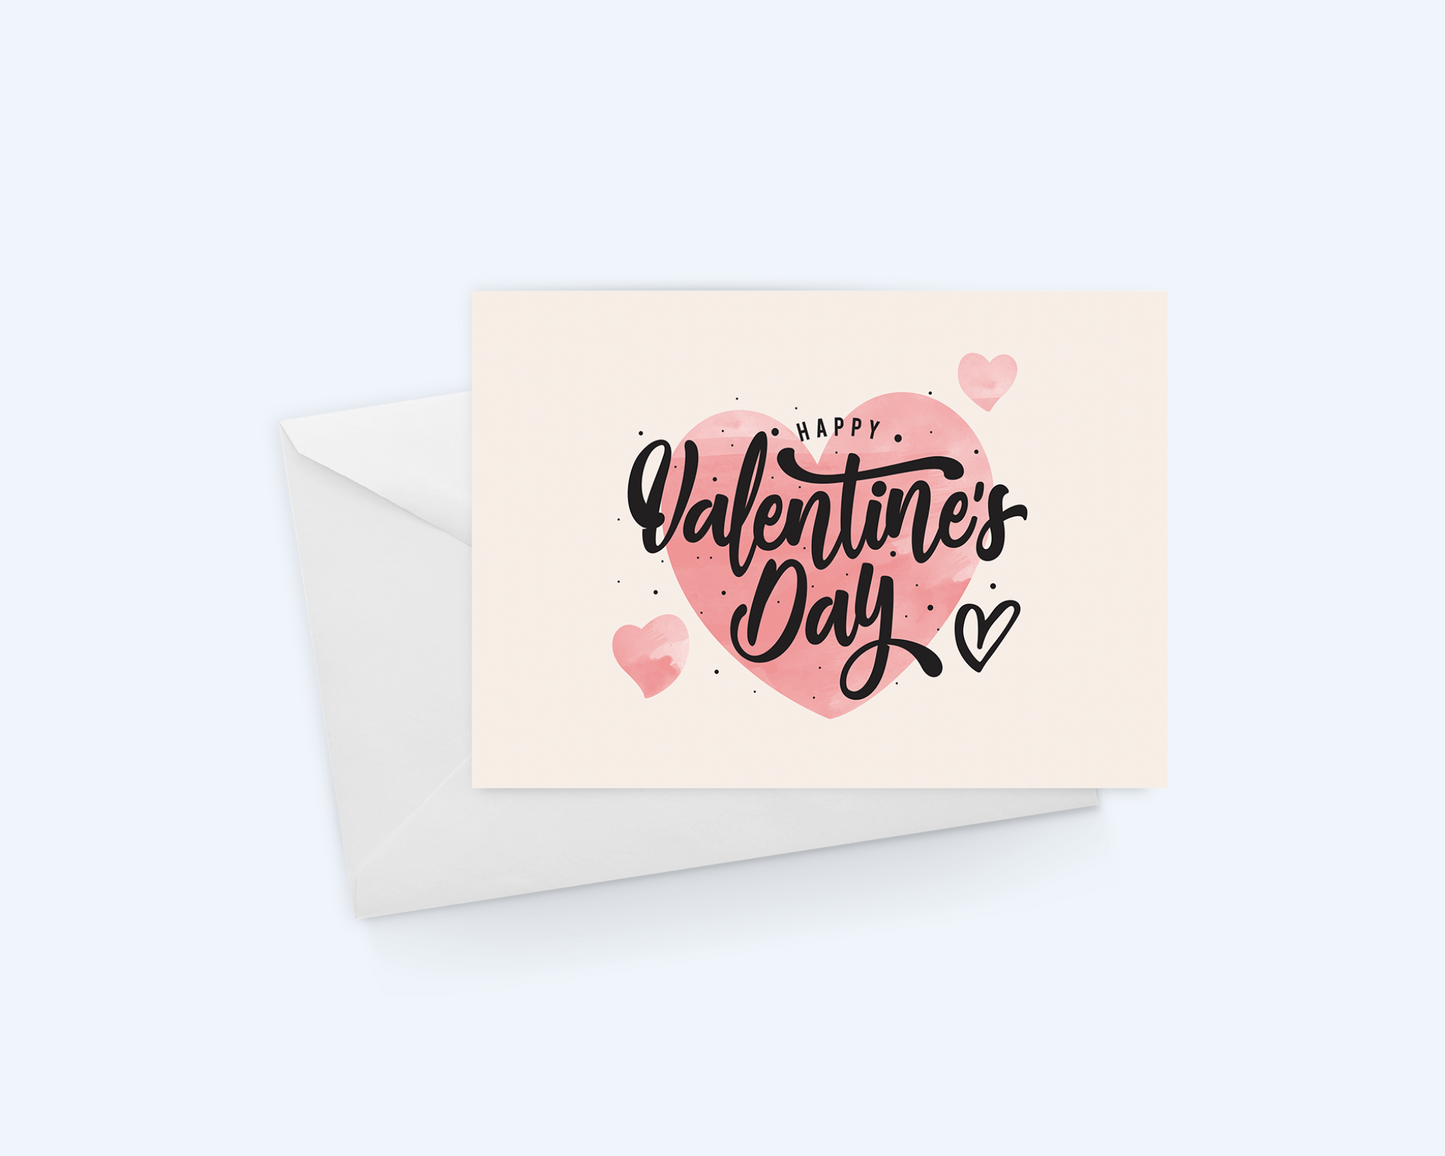 Valentine's Day Greeting Card : Happy Valentine's Day, With Hearts.